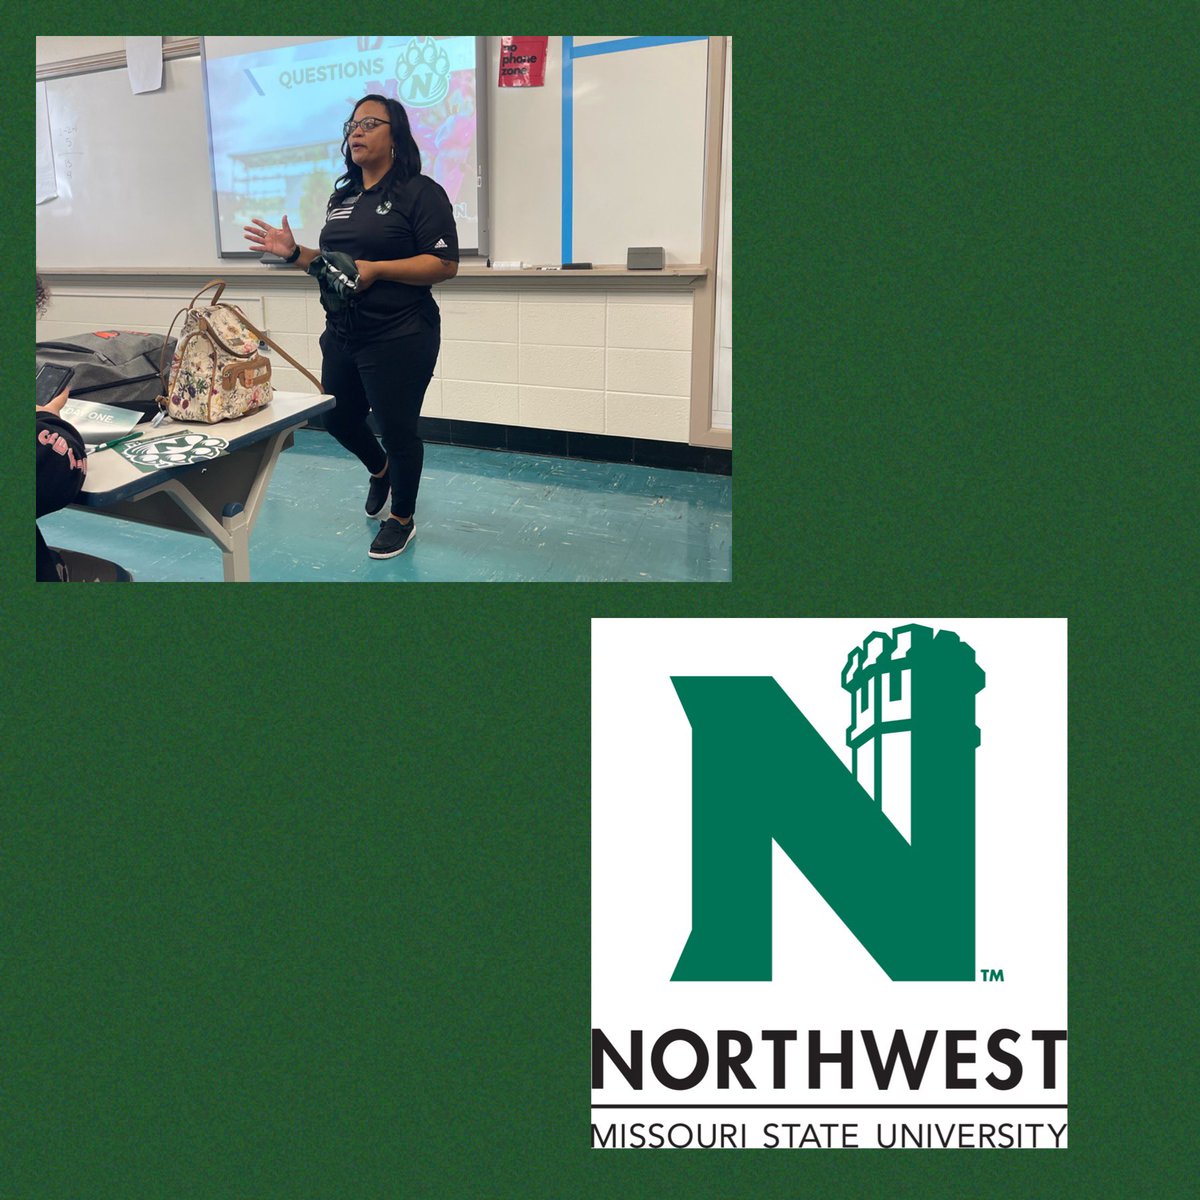 Shout out to @NW_ChristianD @NWMOSTATE for meeting with @RQSSouthHigh students and answering any questions students may have about attending their university!!😊😊😊😊😊